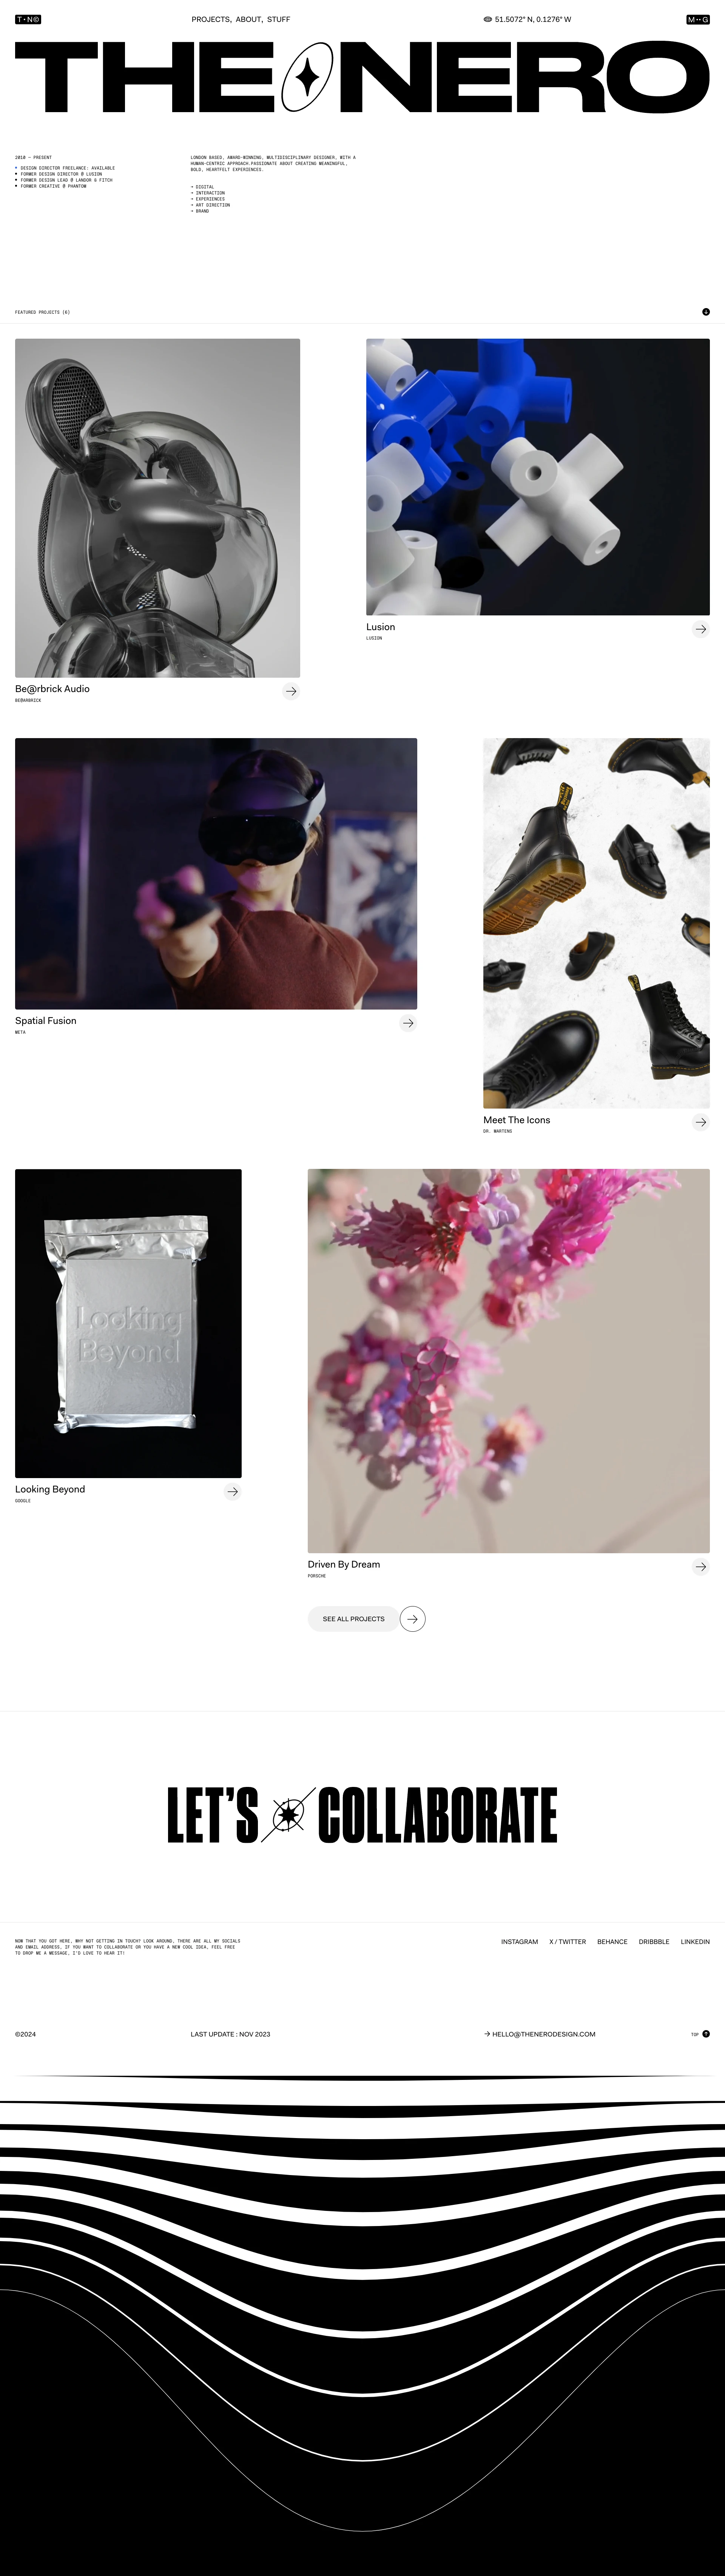 Marco Grimaldi Landing Page Example: Marco Grimaldi is a multi-disciplinary designer and director with a background in traditional graphic design and development. His work primarily focuses on digital design, immersive experience and identity design.